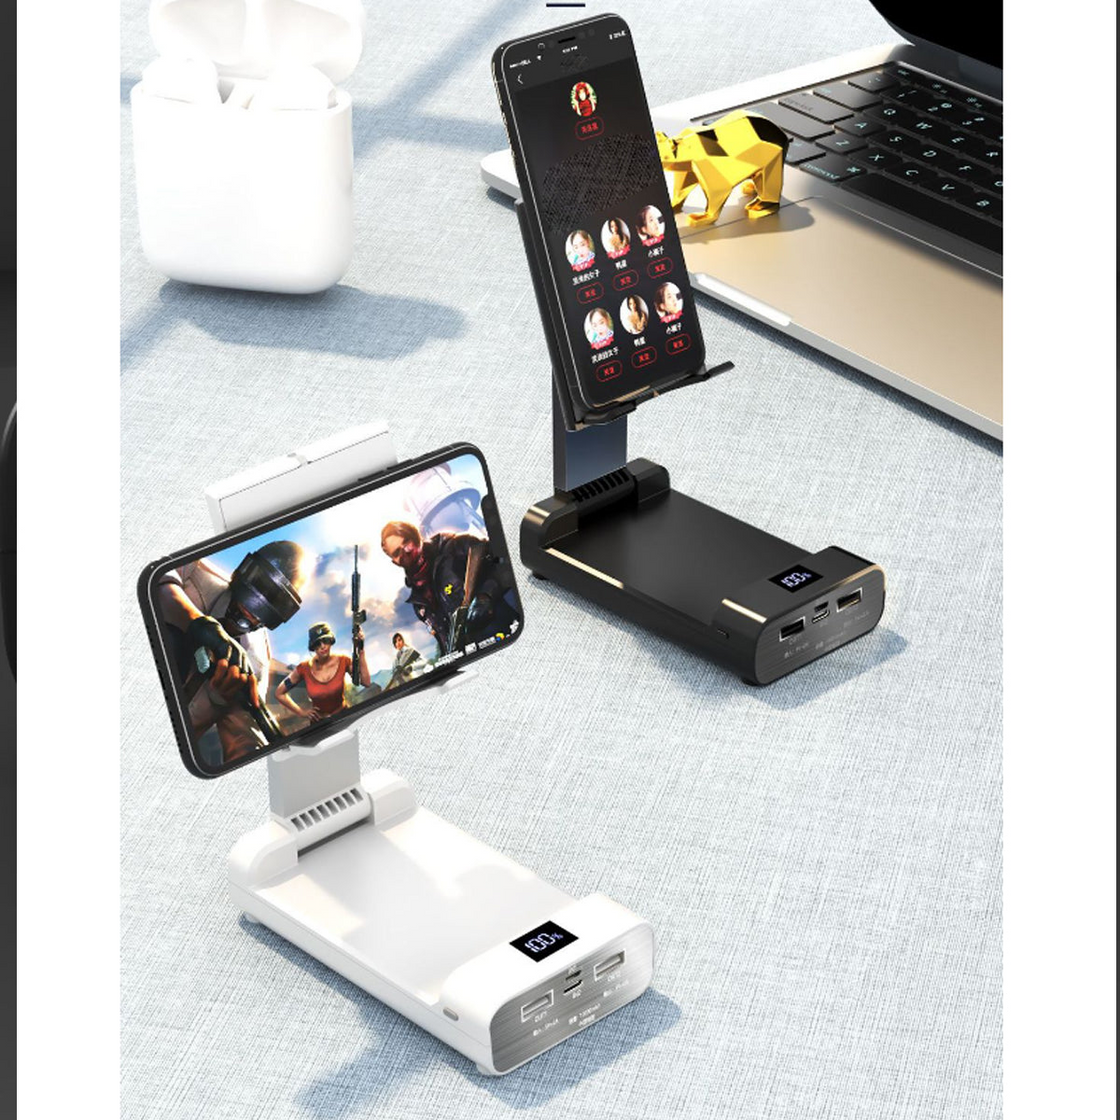 Endurance Power Bank With Stand Holder - Foldable and Portable